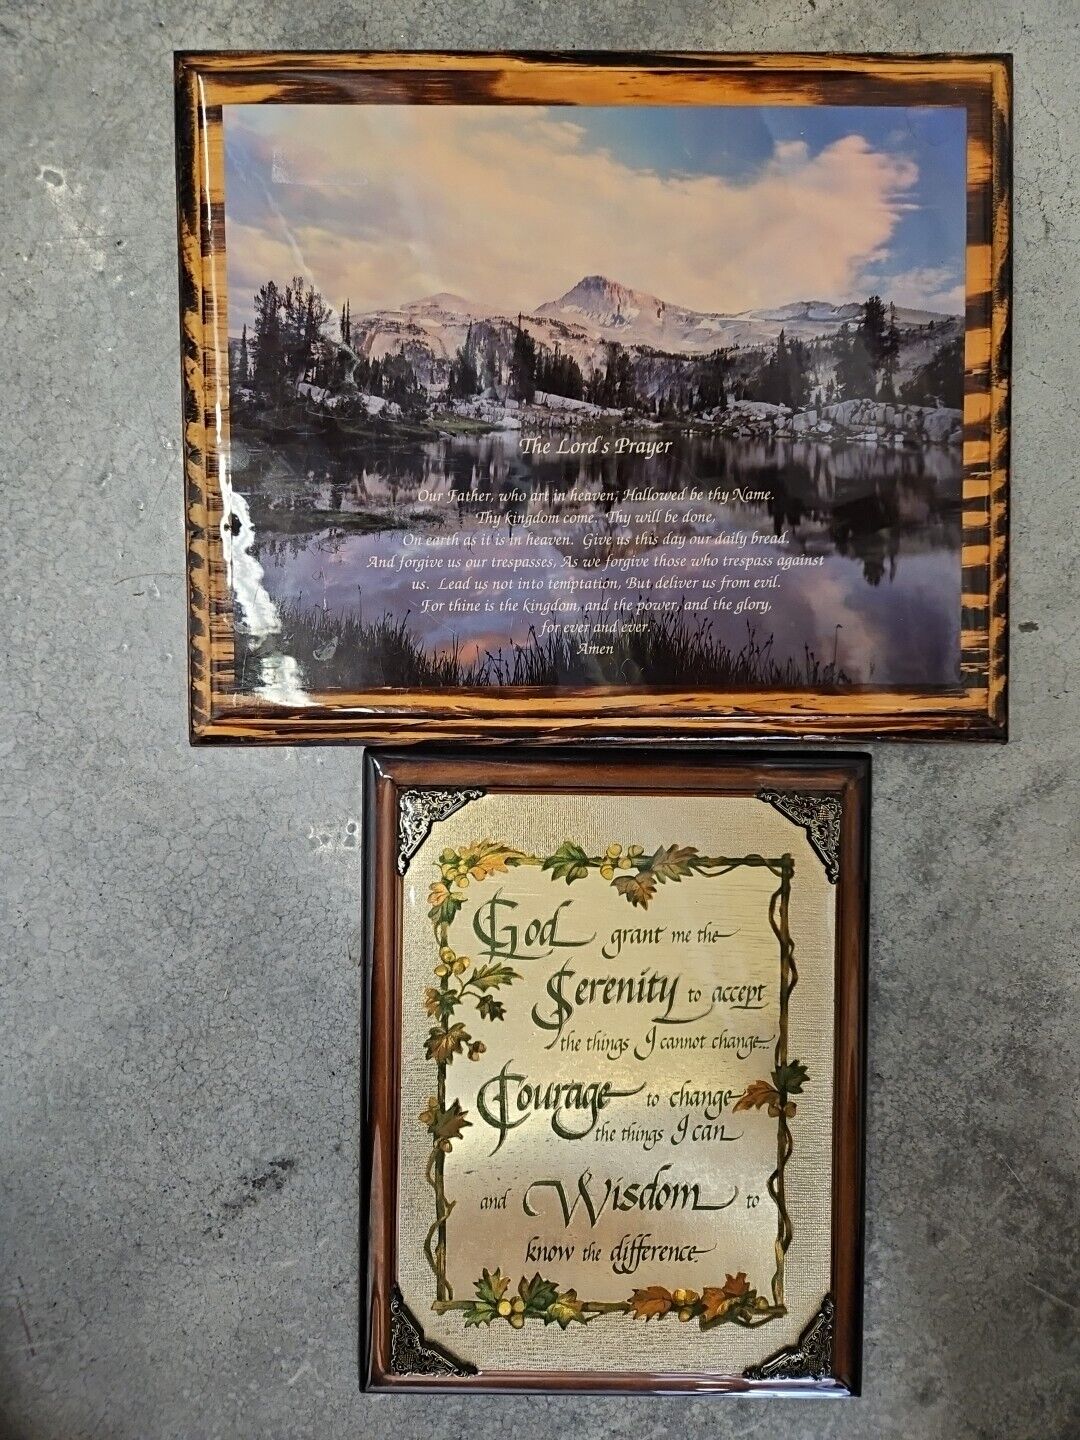 Vintage The Lord's Prayer Serenity Prayer Wall Plaques 